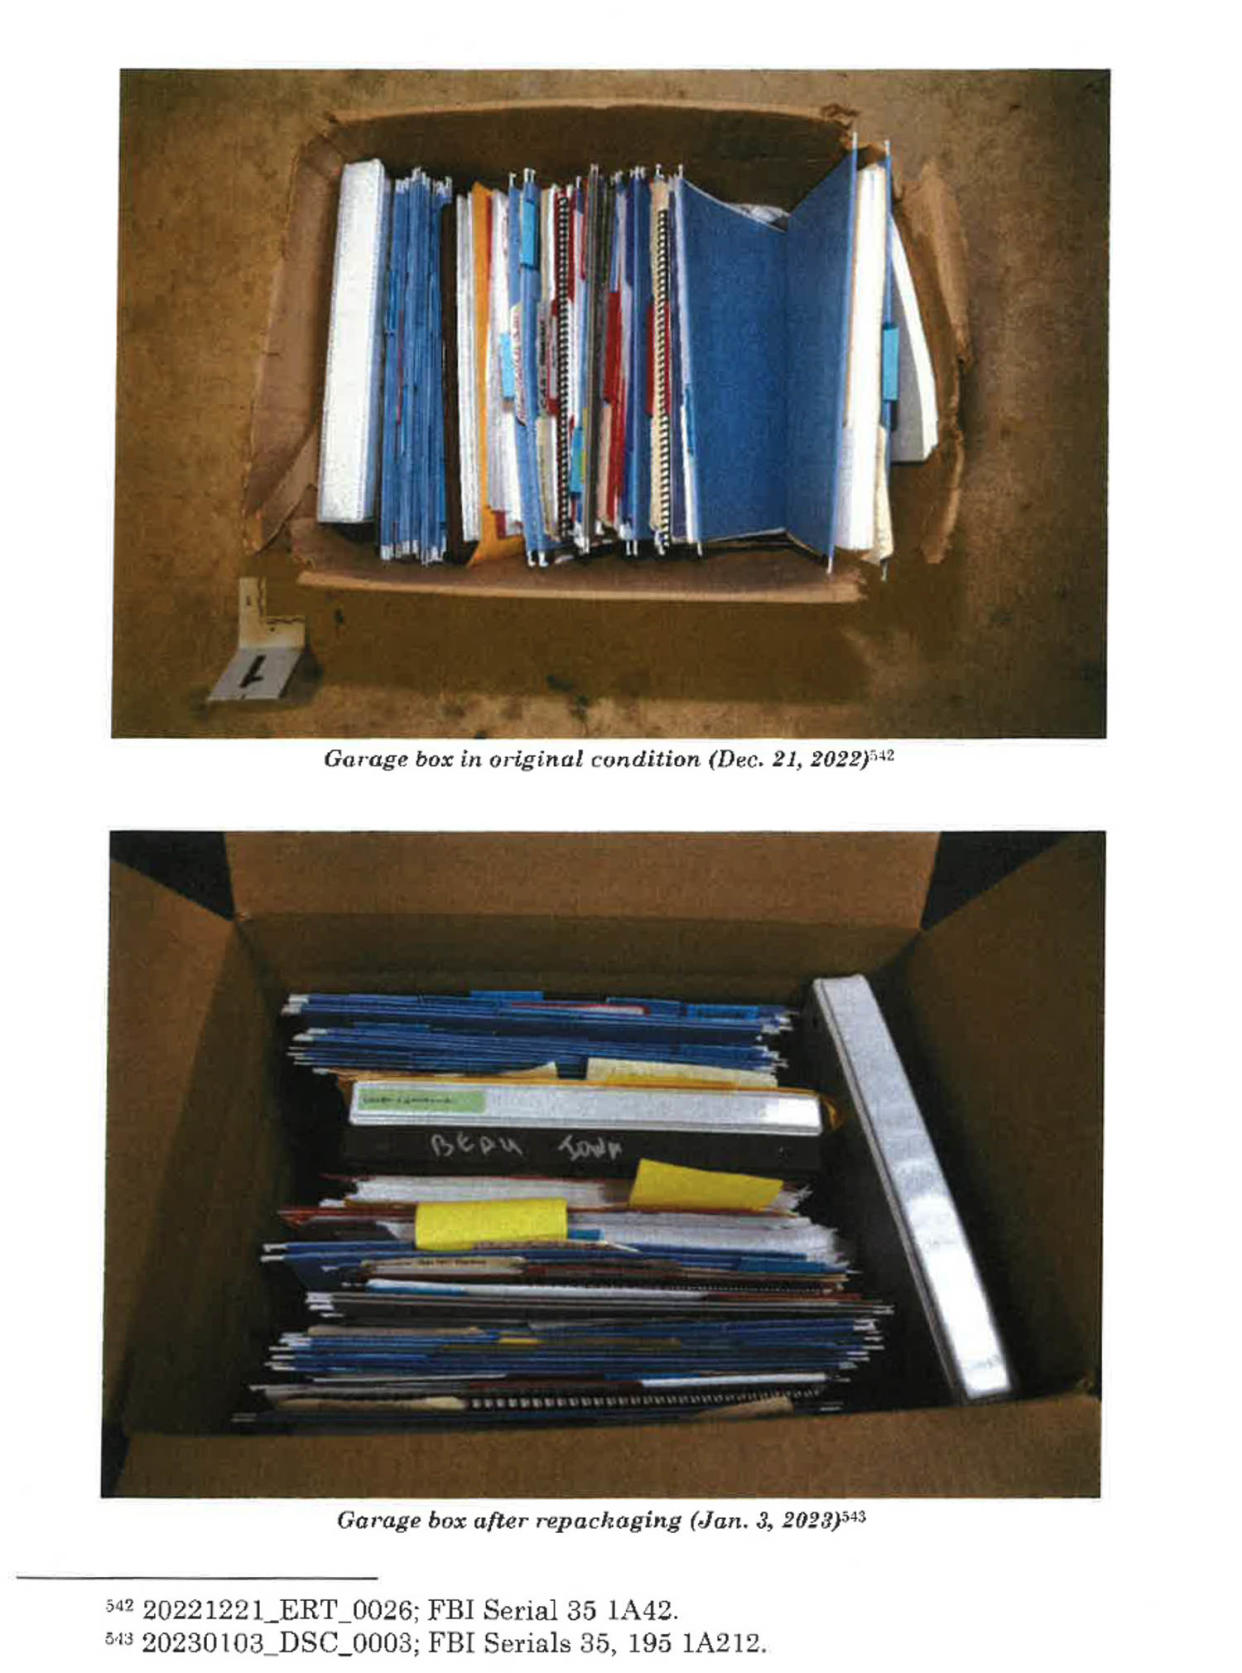 hur report

Pg. 126, 127, 128 SEVERAL PHOTOS OF BOXES IN WILMINGTON, DEL GARAGE Among the places Mr. Biden's lawyers found classified documents in the garage was a damaged, opened box containing numerous hanging folders, file folders, and binders.537 The box, which was labeled 